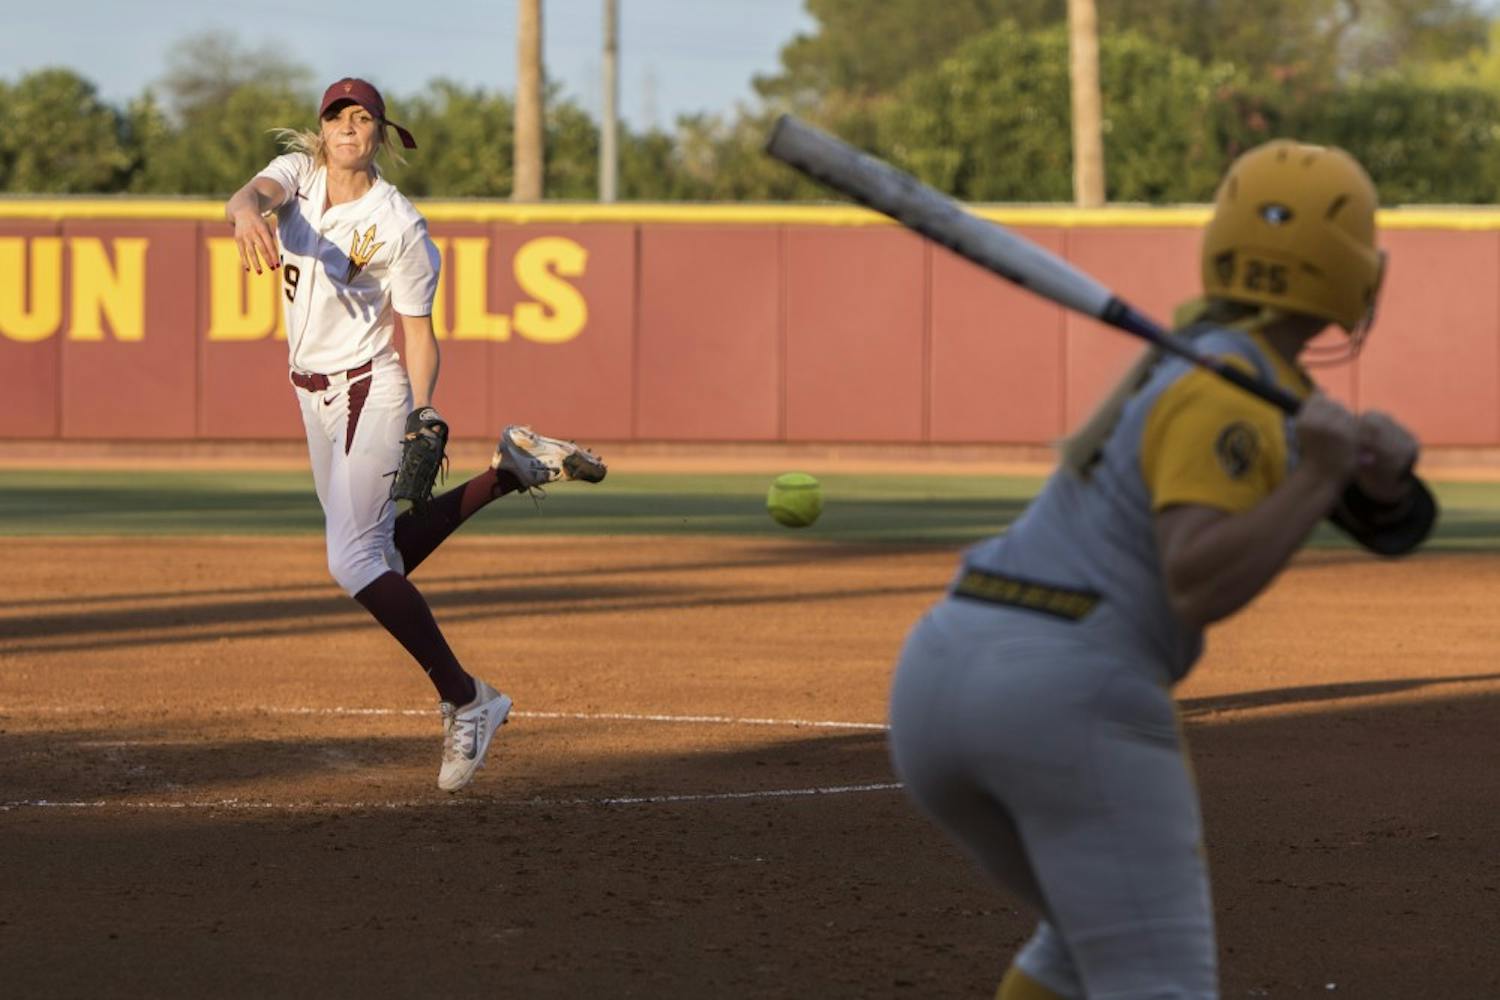 Freshman Breanna Macha allows seven runs on nine hits in six innings pitched against California at Farrington Stadium in Tempe  on Friday March 20, 2015. The Sun Devils defeated the Bears 8-7. (Jacob Stanek/ The State Press)